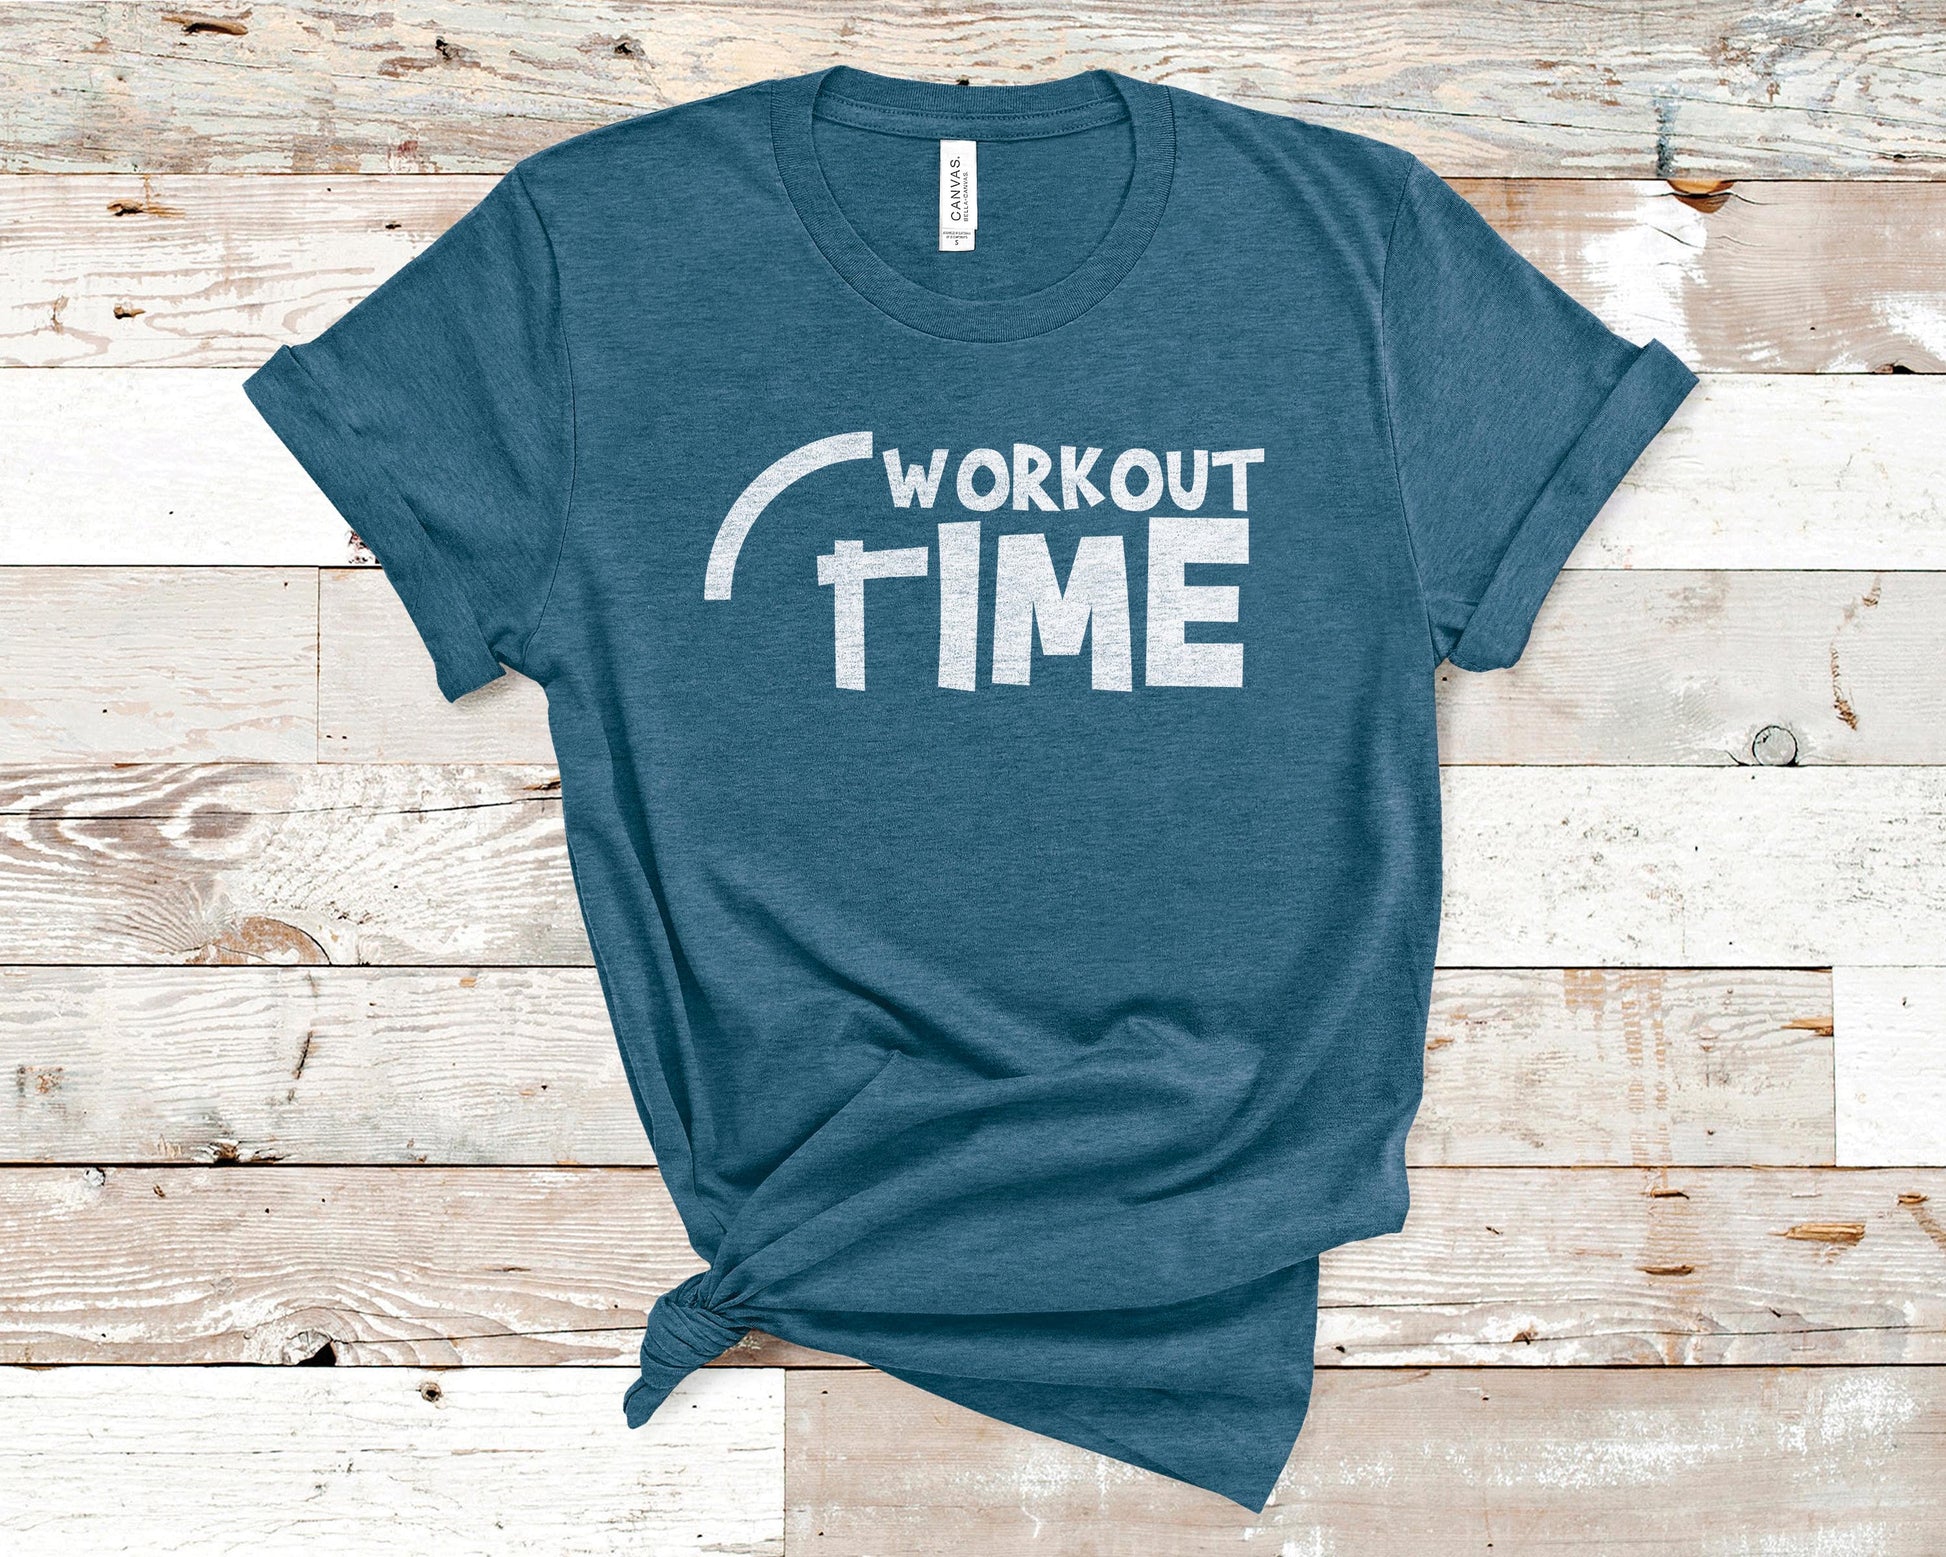 Seyer Designs Work out time shirt Workout shirt, Gym T-shirt design, Tshirt for Fitness